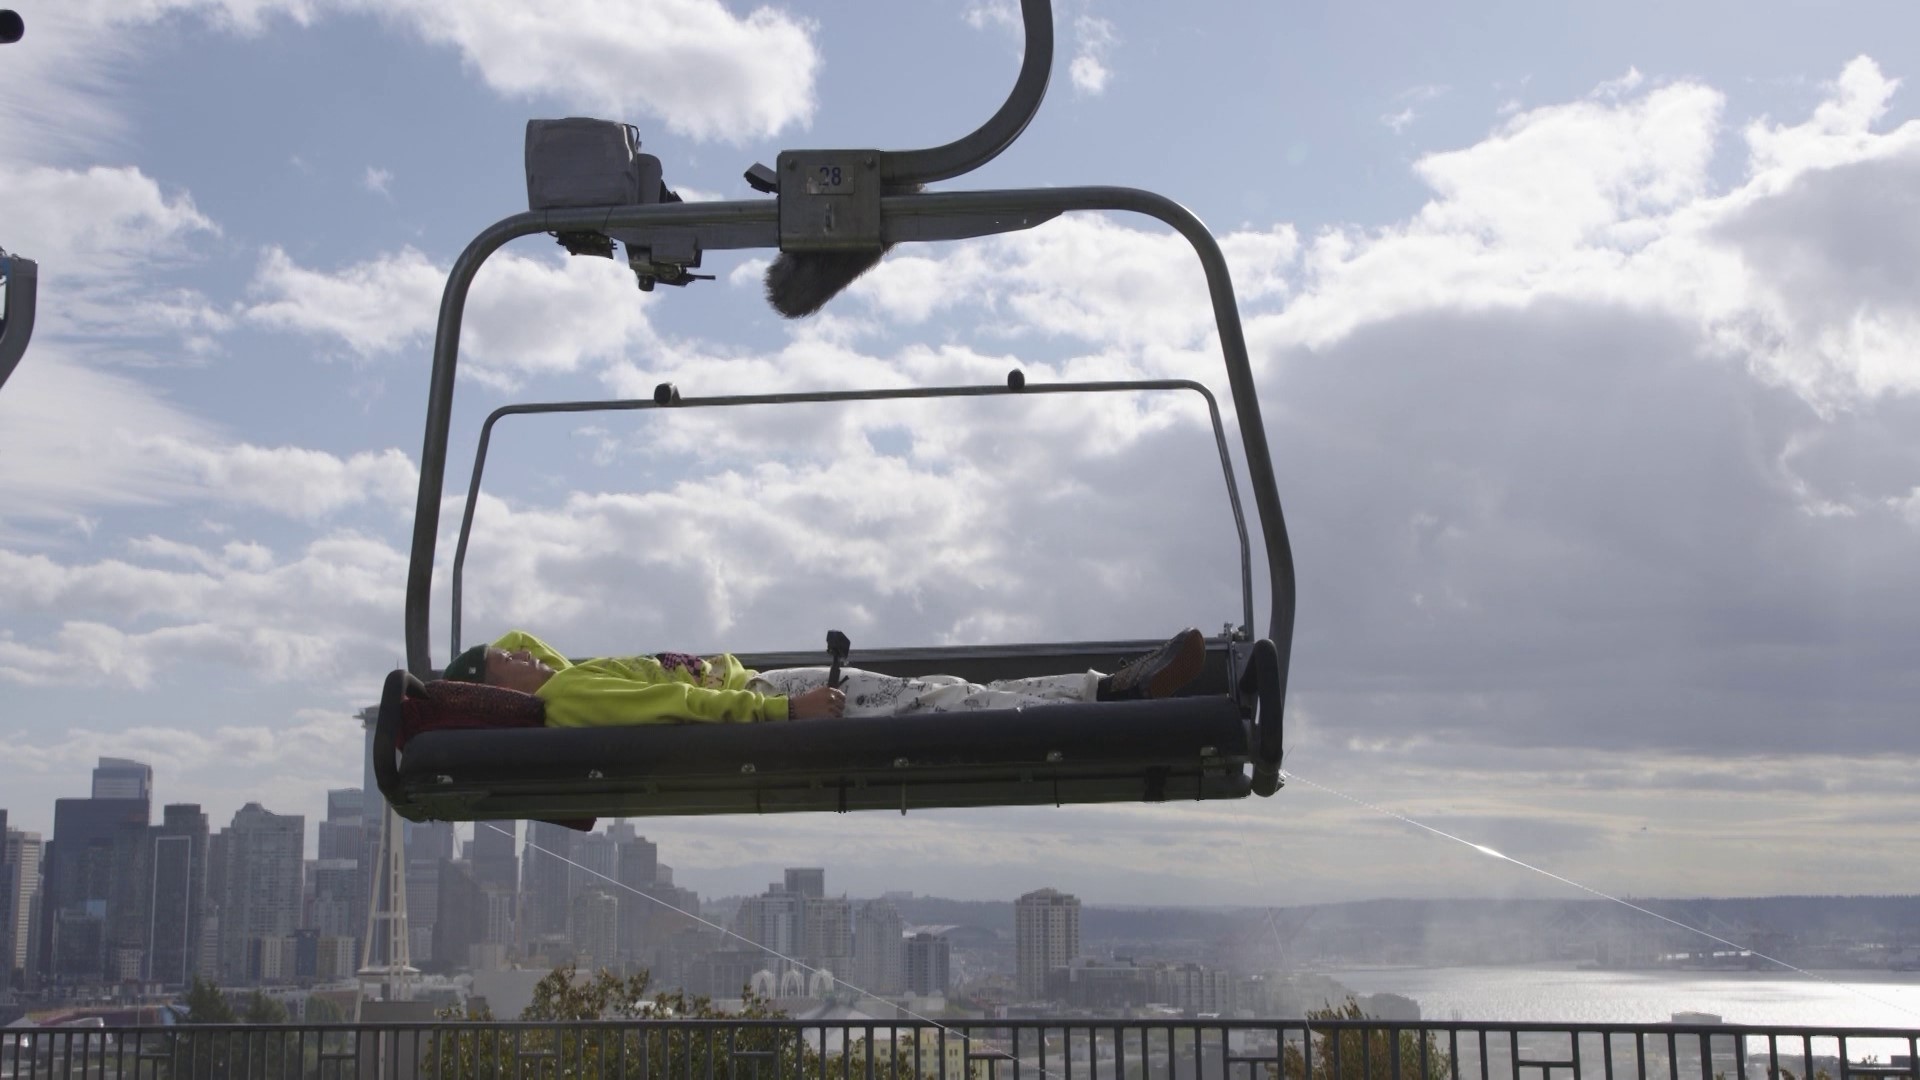 Our very own Jose Cedeno had a ski chairlift therapy session during a commercial filming in Queen Anne. #k5evening